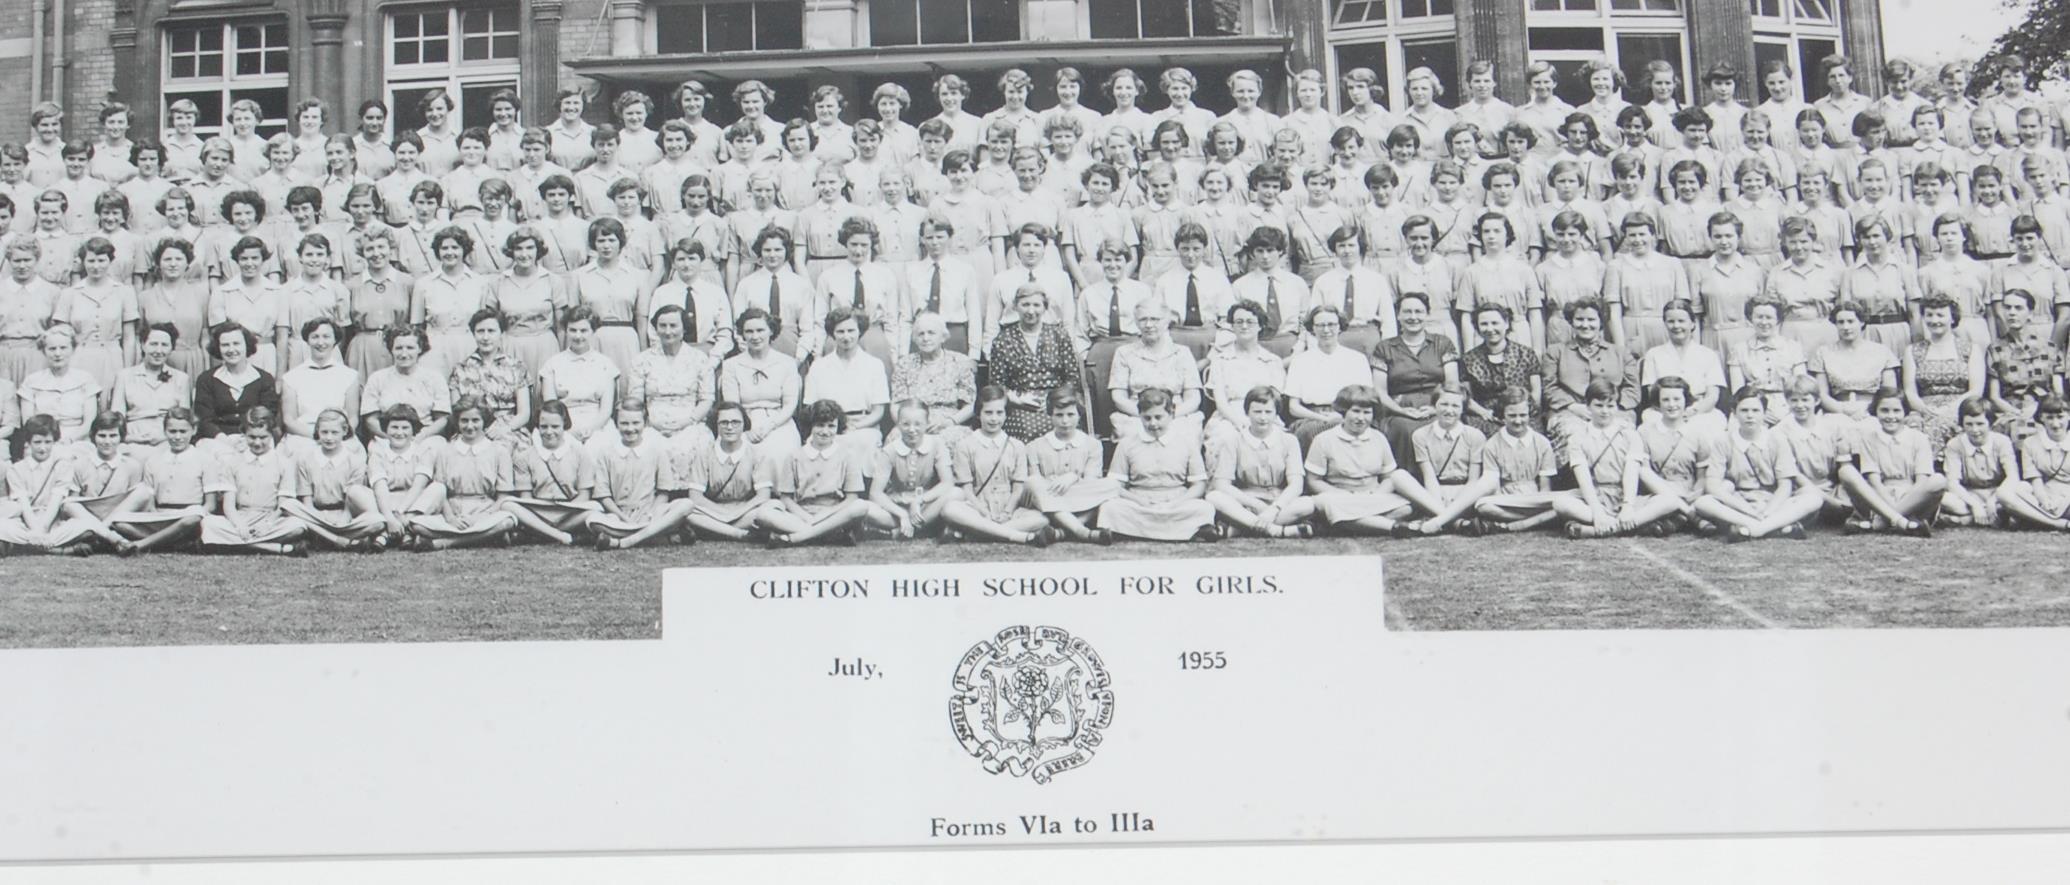 COOLECTION OF FOUR SCHOOL PHOTGRAPHS OF CLIFTON HIGH SCHOOL FOR GIRLS - Image 6 of 18